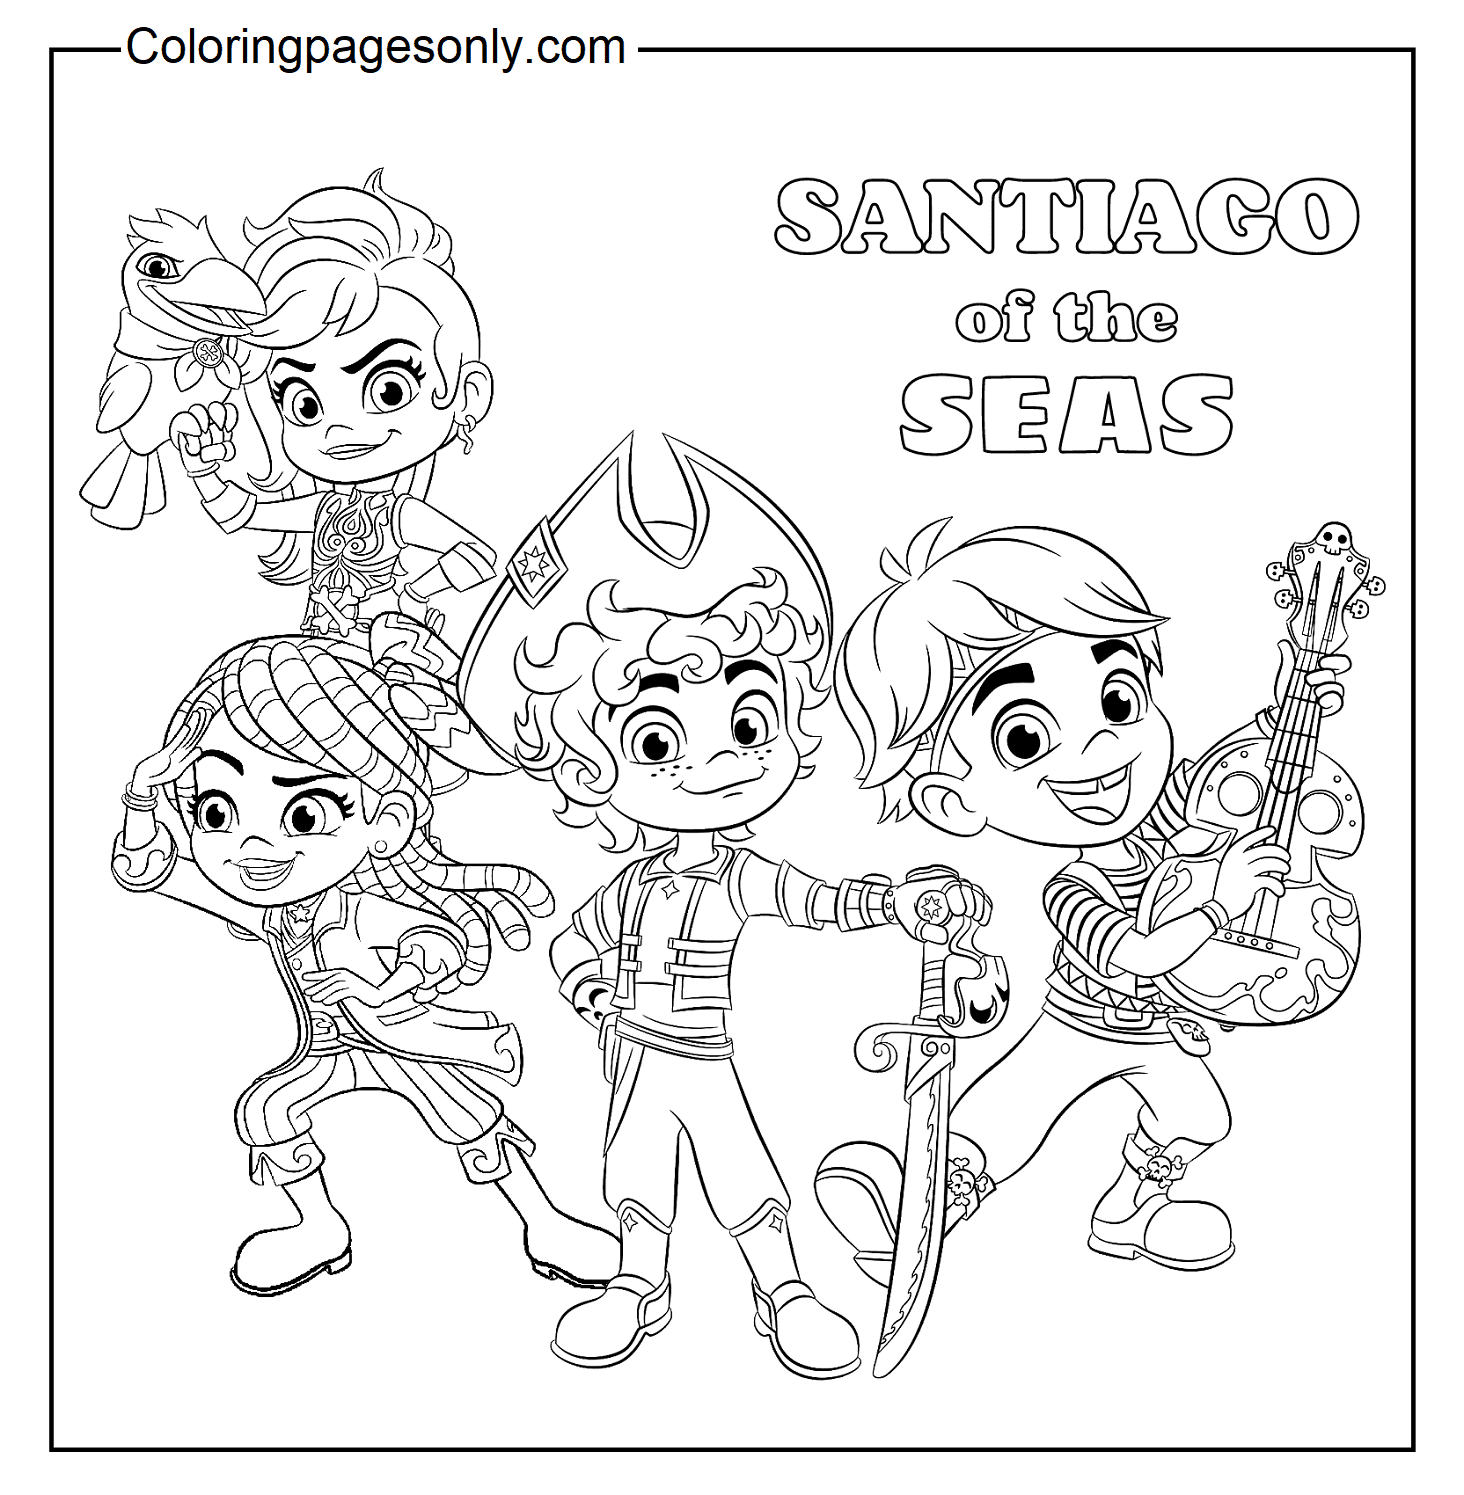 Free Printable Santiago Of The Seas Coloring Pages